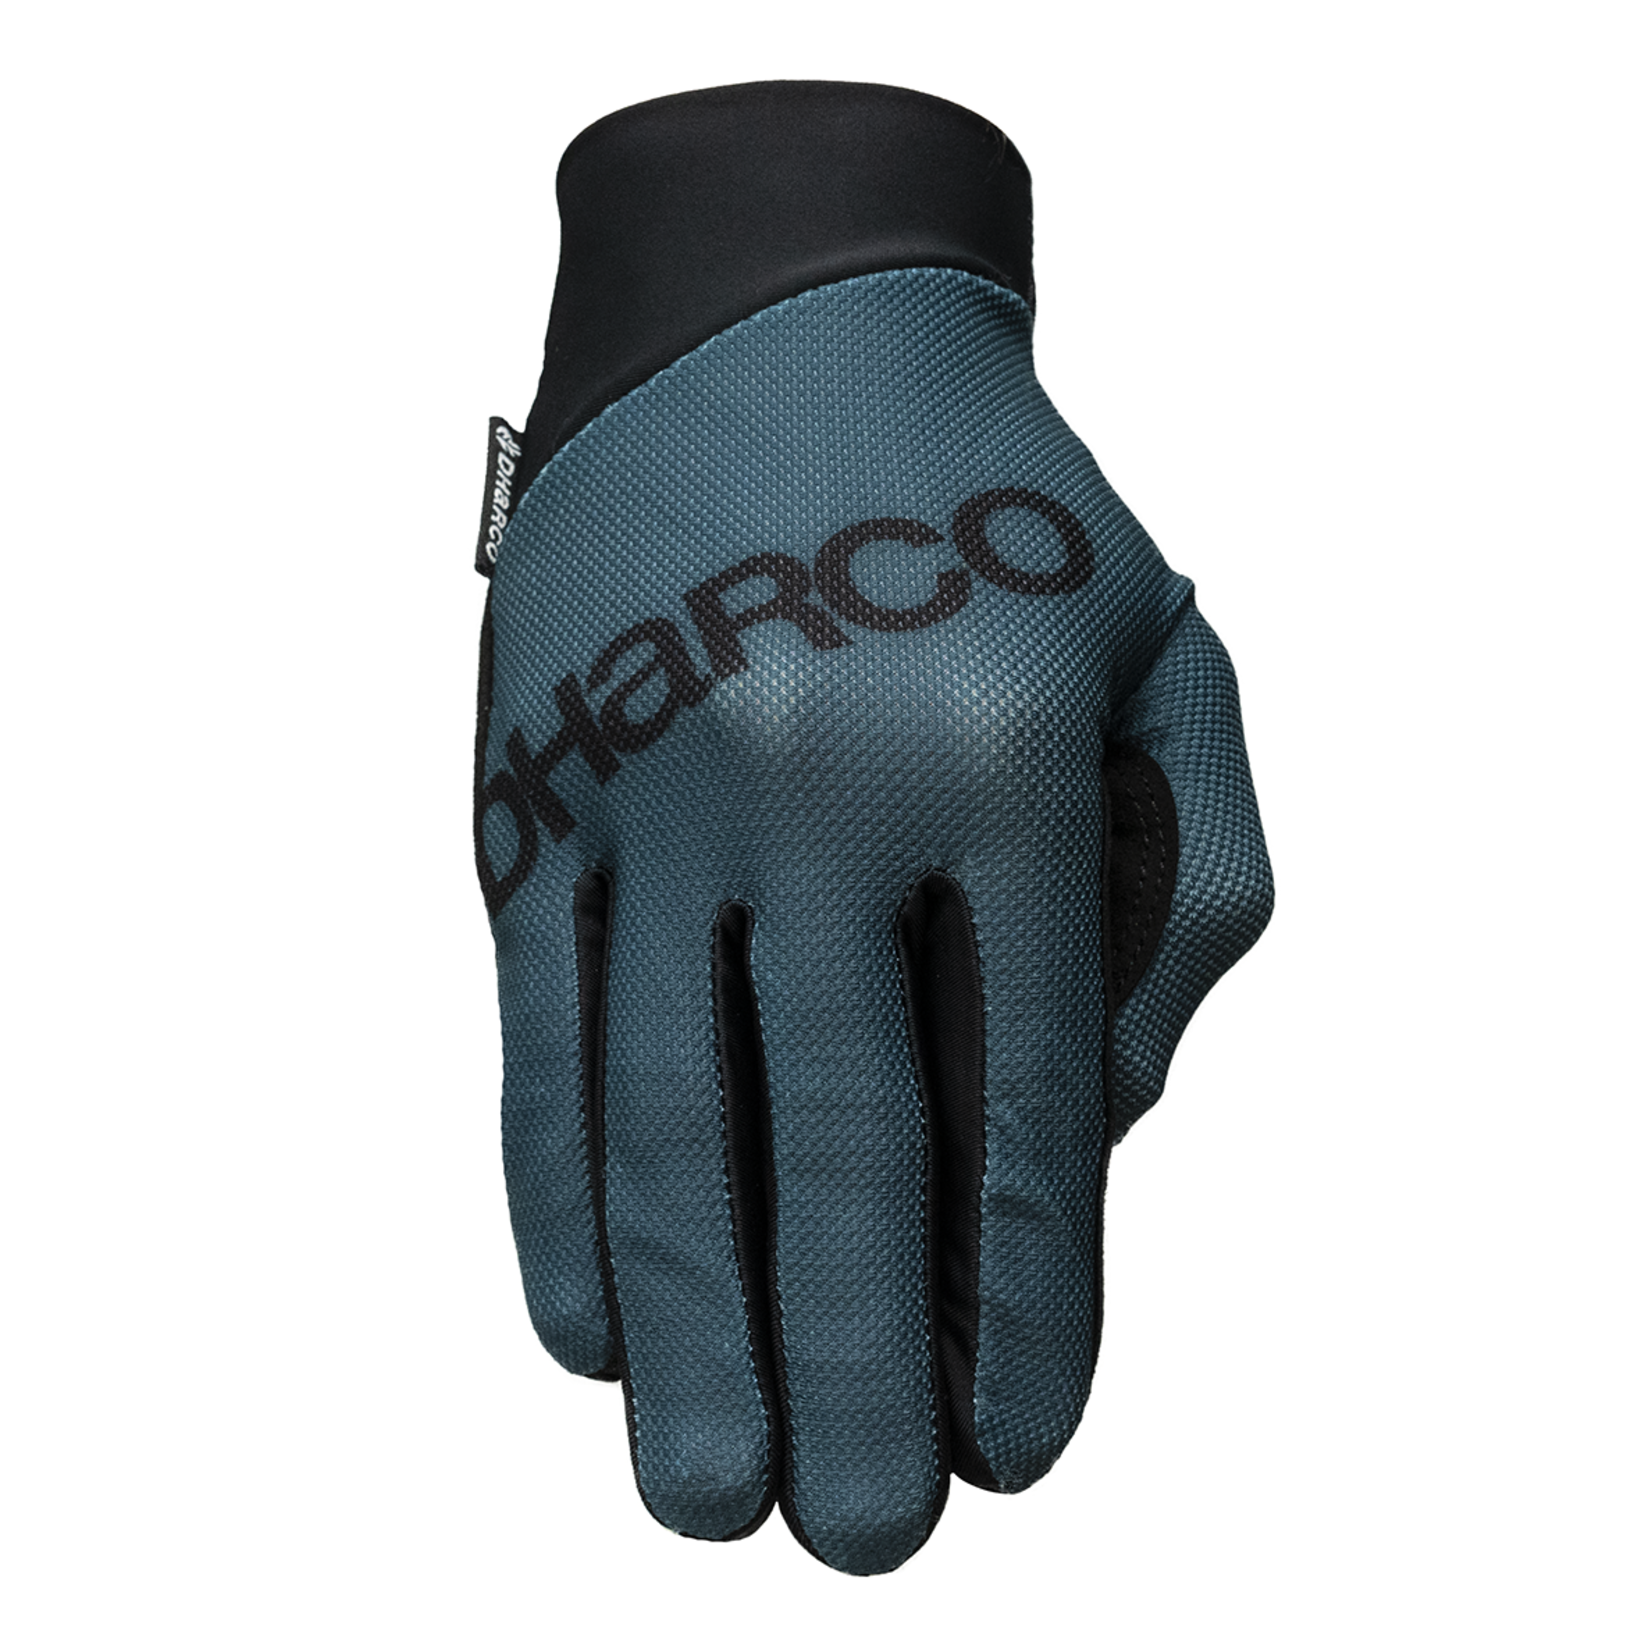 DHARCO DHARCO MENS GRAVITY GLOVES